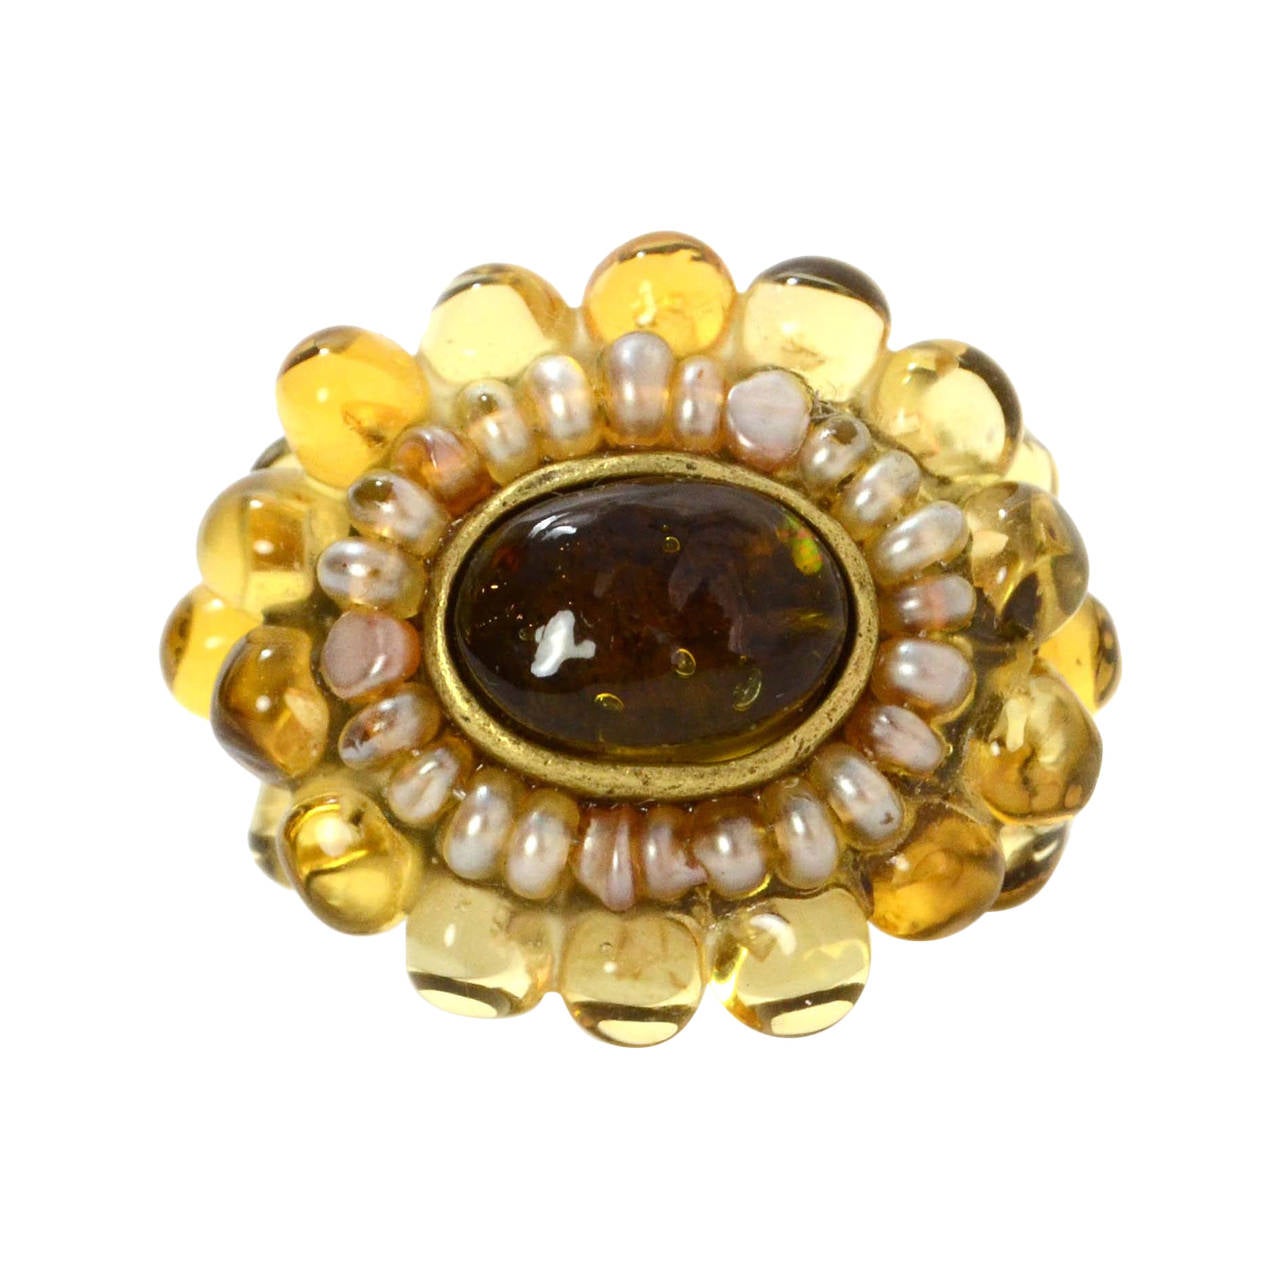 Chanel Pearl & Amber Glass Ring sz 6.5